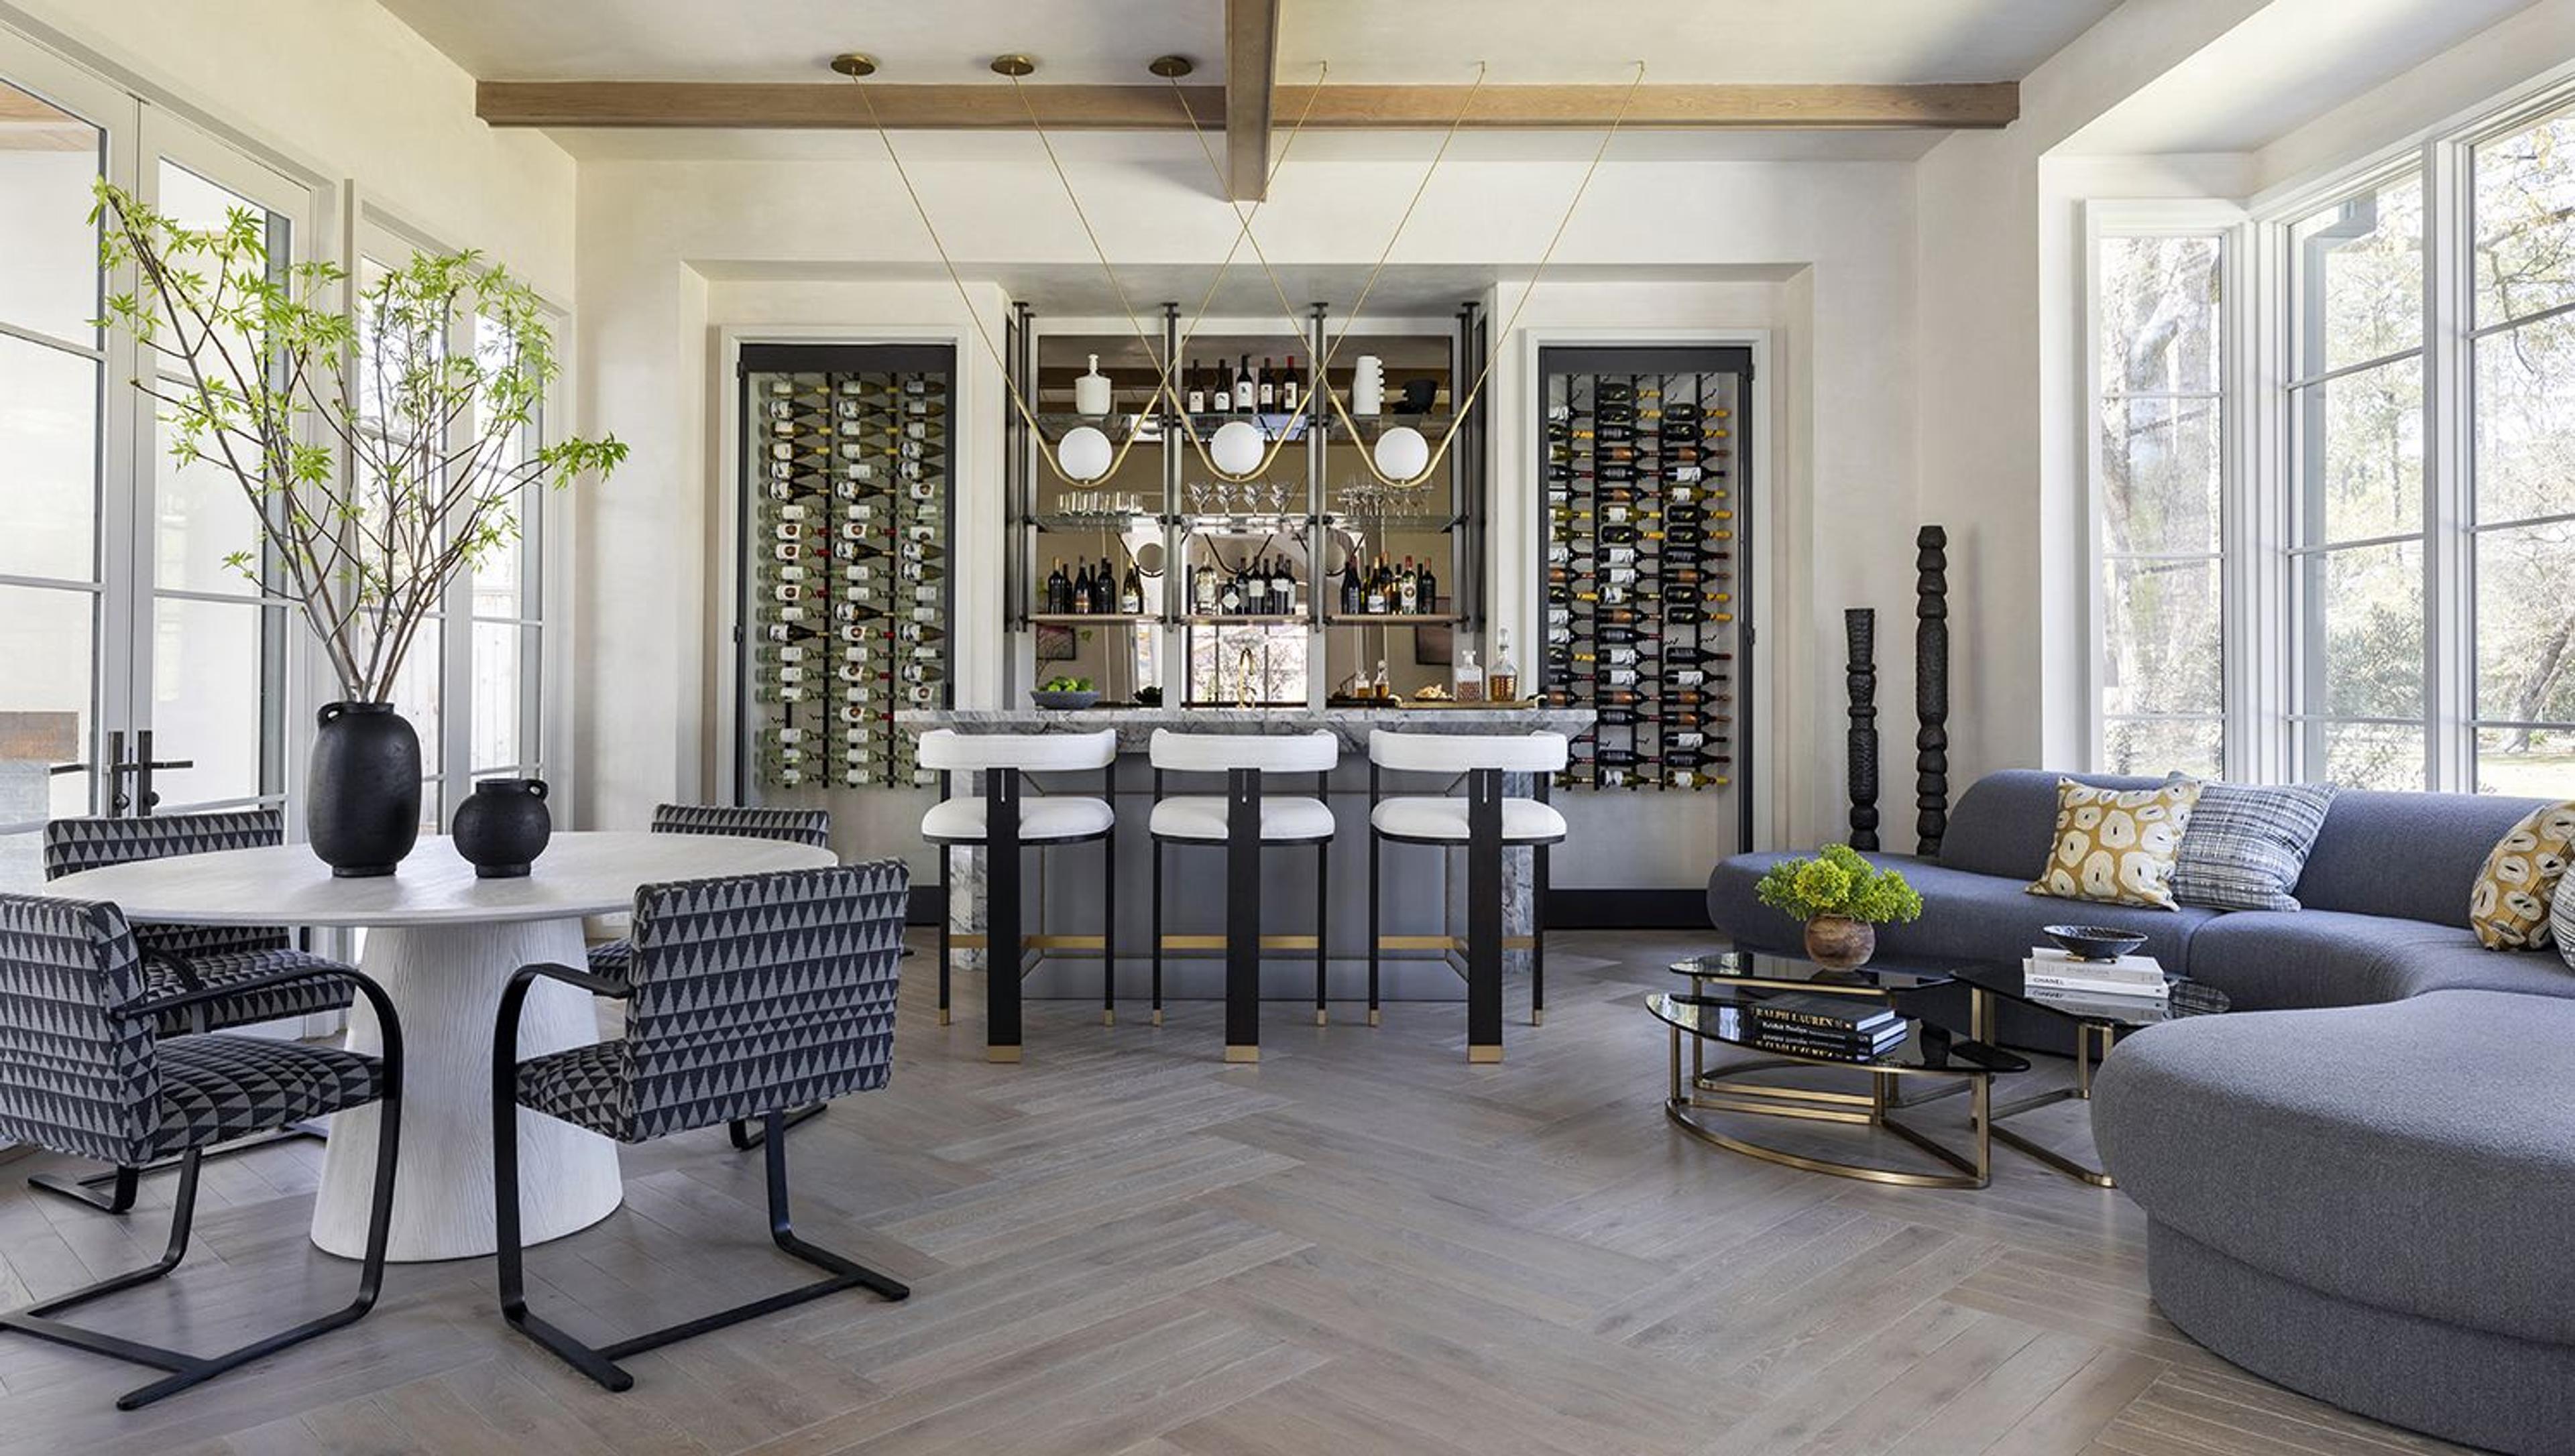 Designed for entertaining, this bar and lounge features dual wine coolers, open shelving, and an aged brass trio pendant featuring hand-blown glass. The bar surface features a unique waterfall stone profile with a thick mitred edge and a reverse bevel that conceals enclosed LED lighting. Curvilinear furnishings and a game table rest atop compound herringbone floors creating the ideal place to spend quality time with friends and family.